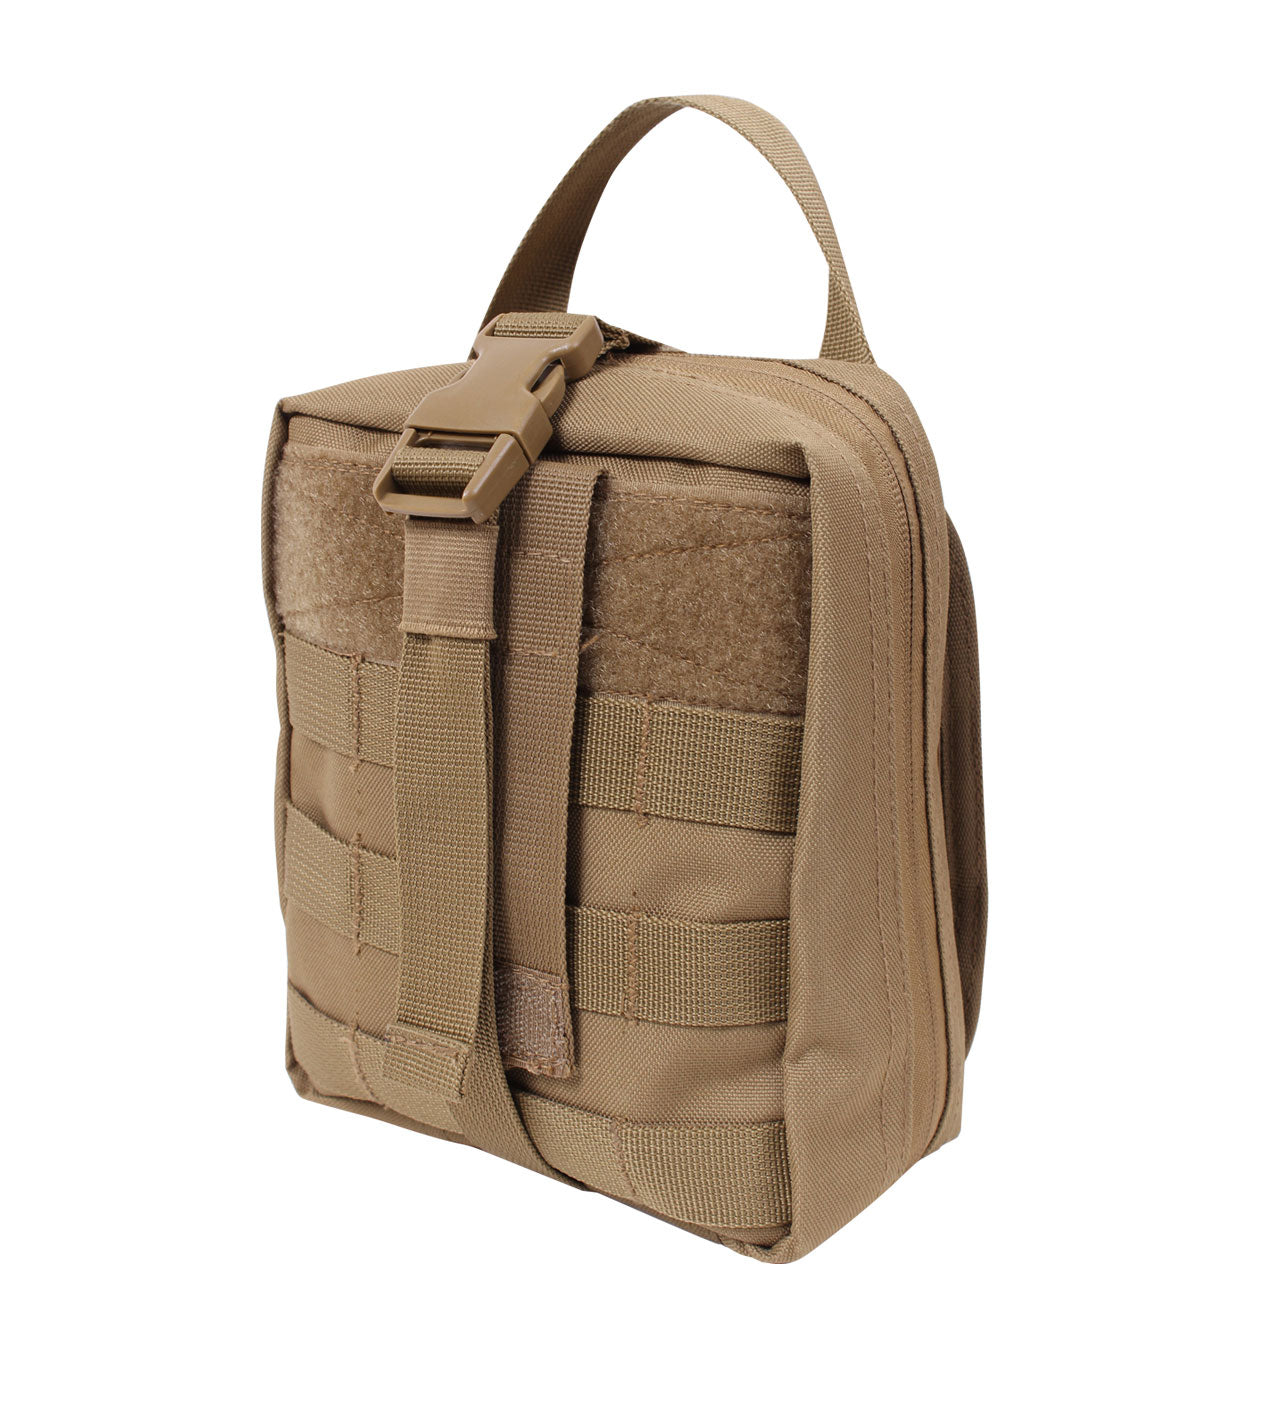 Rothco Tactical Breakaway First Aid Kit